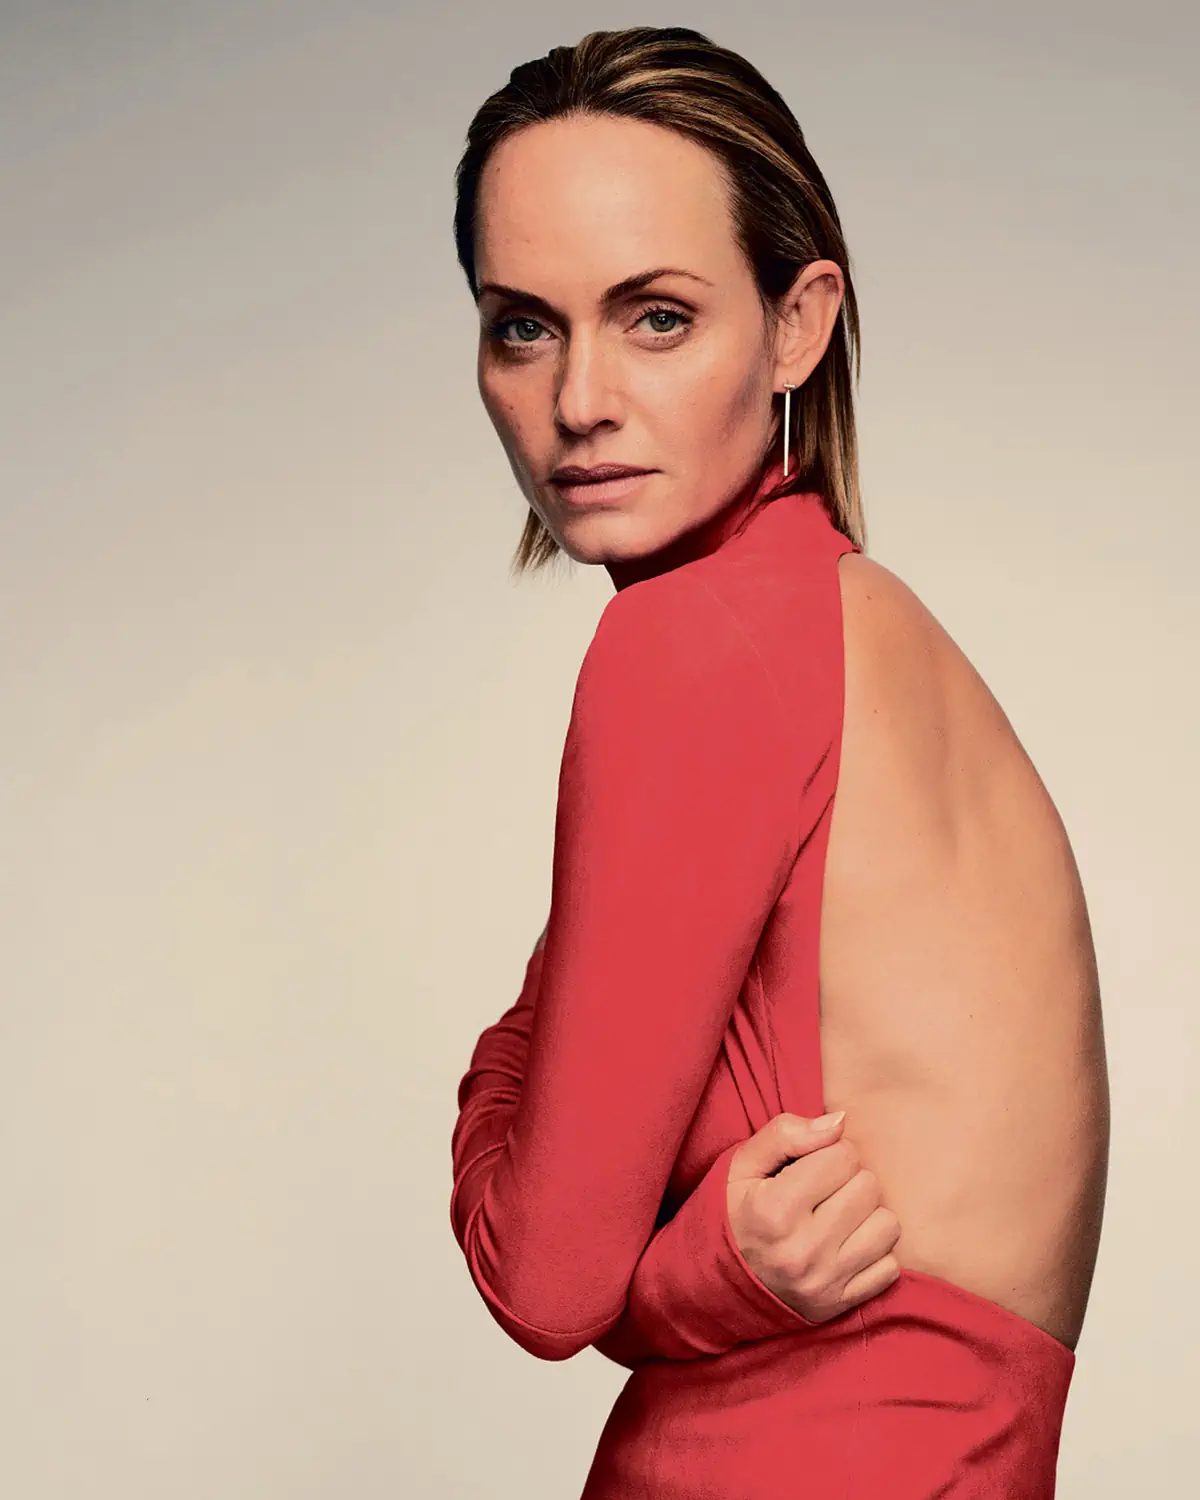 Amber Valletta covers How To Spend It February 11th, 2023 by Nathaniel Goldberg